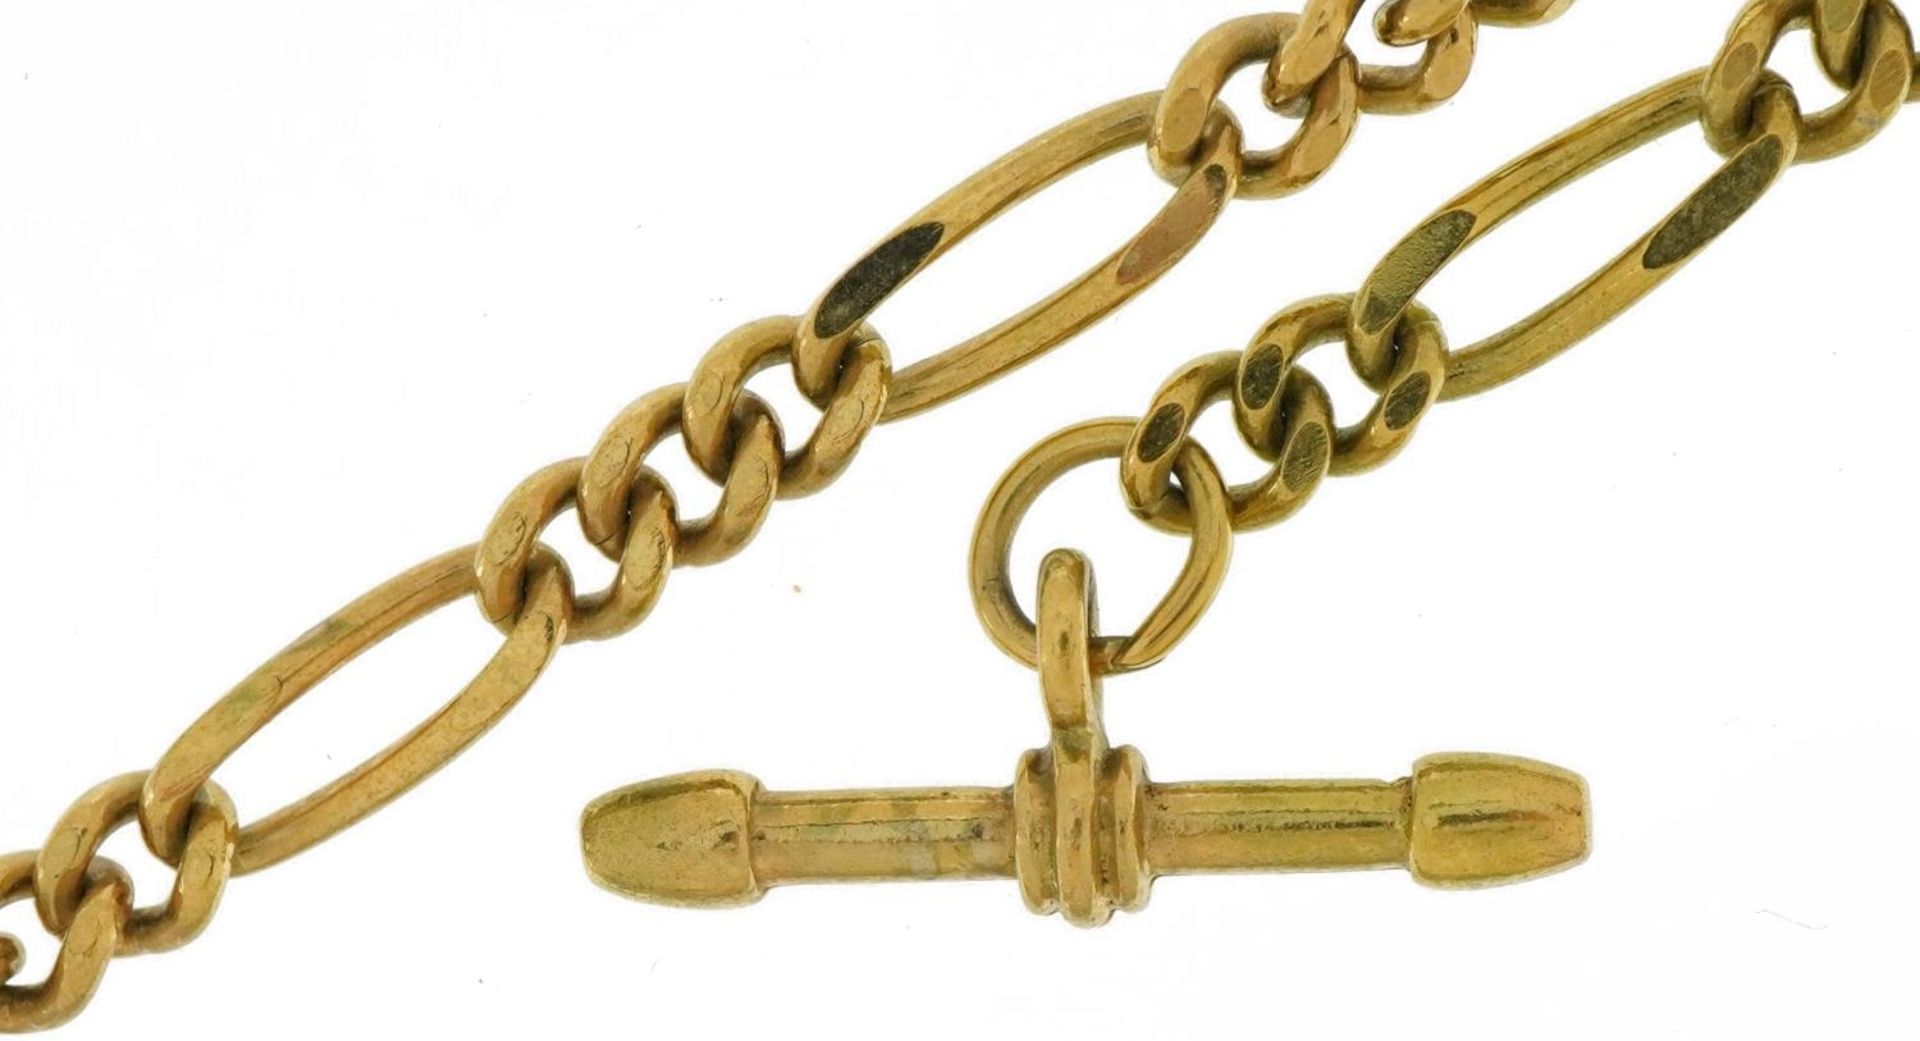 Gold plated Figaro link watch chain with T bar and dog clip, 48cm in length, 25.8g : For further